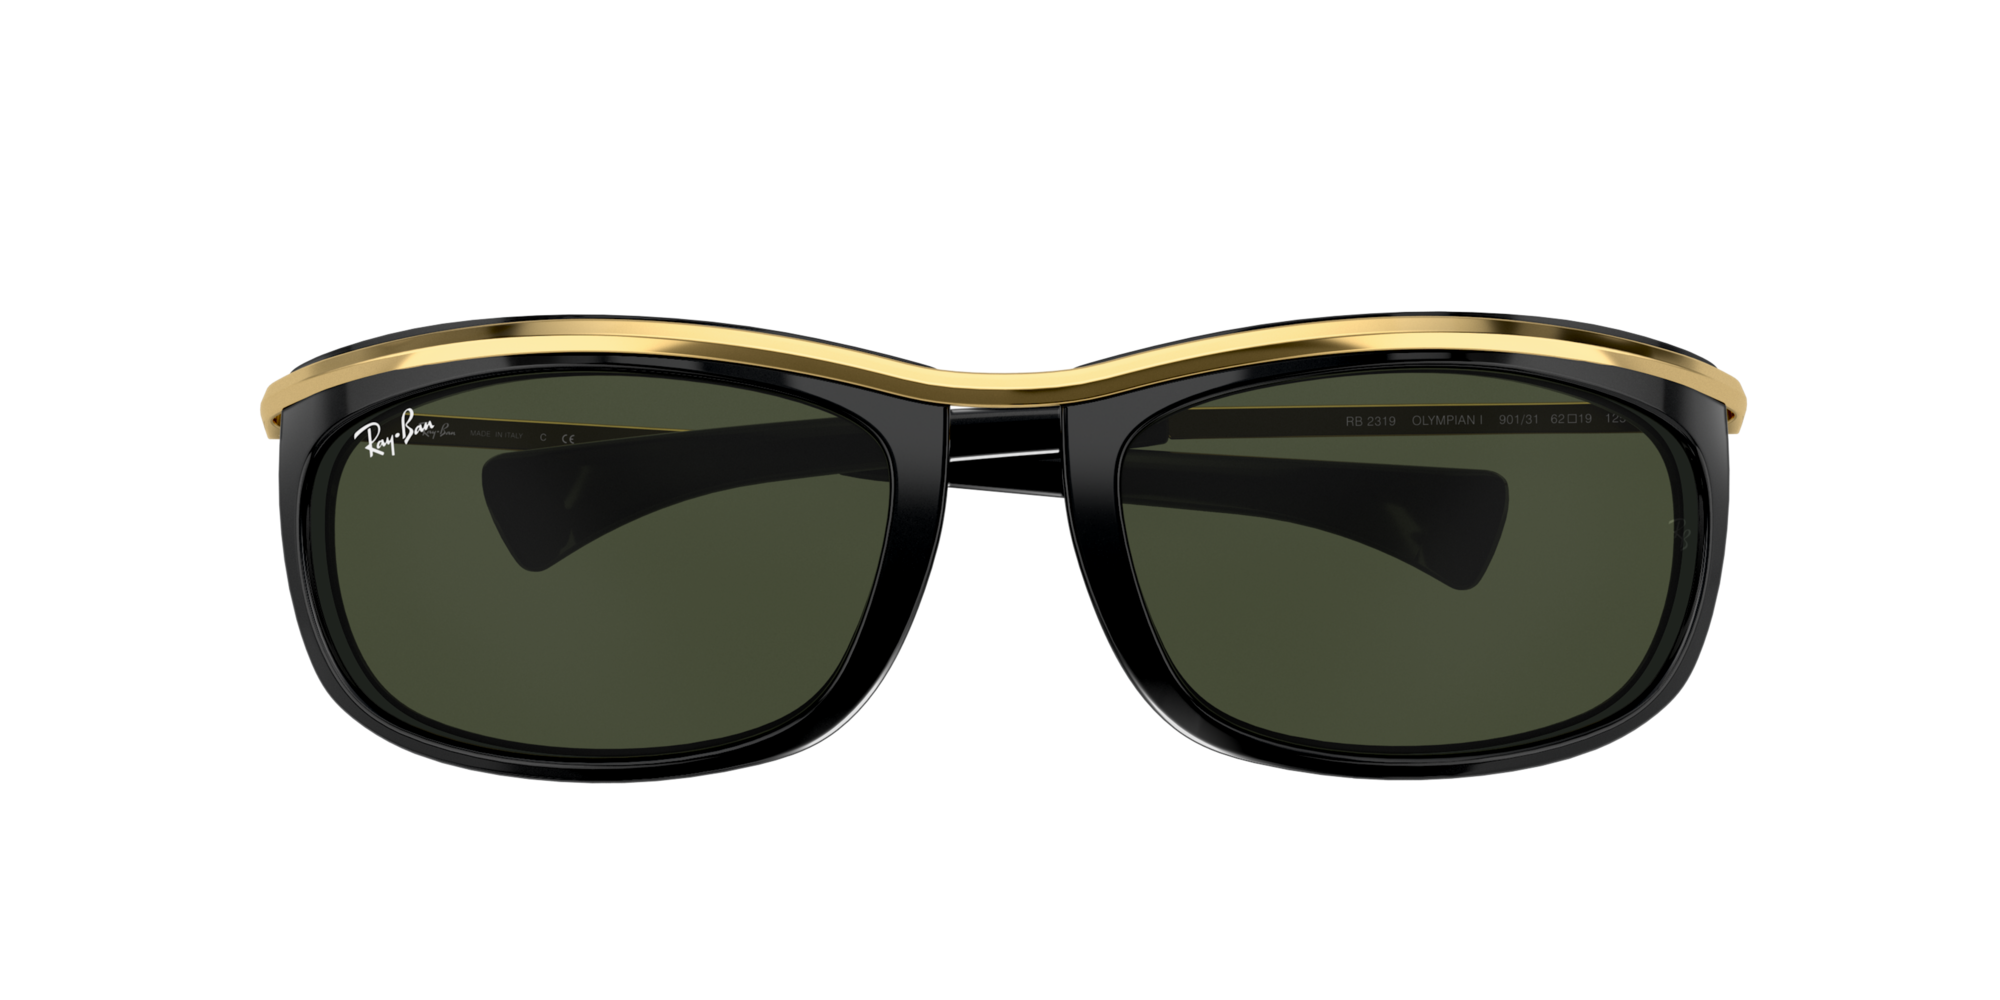 Sunglasses Ray-Ban Olympian RB 3119 (9161R5) RB3119 Unisex | Free Shipping  Shop Online